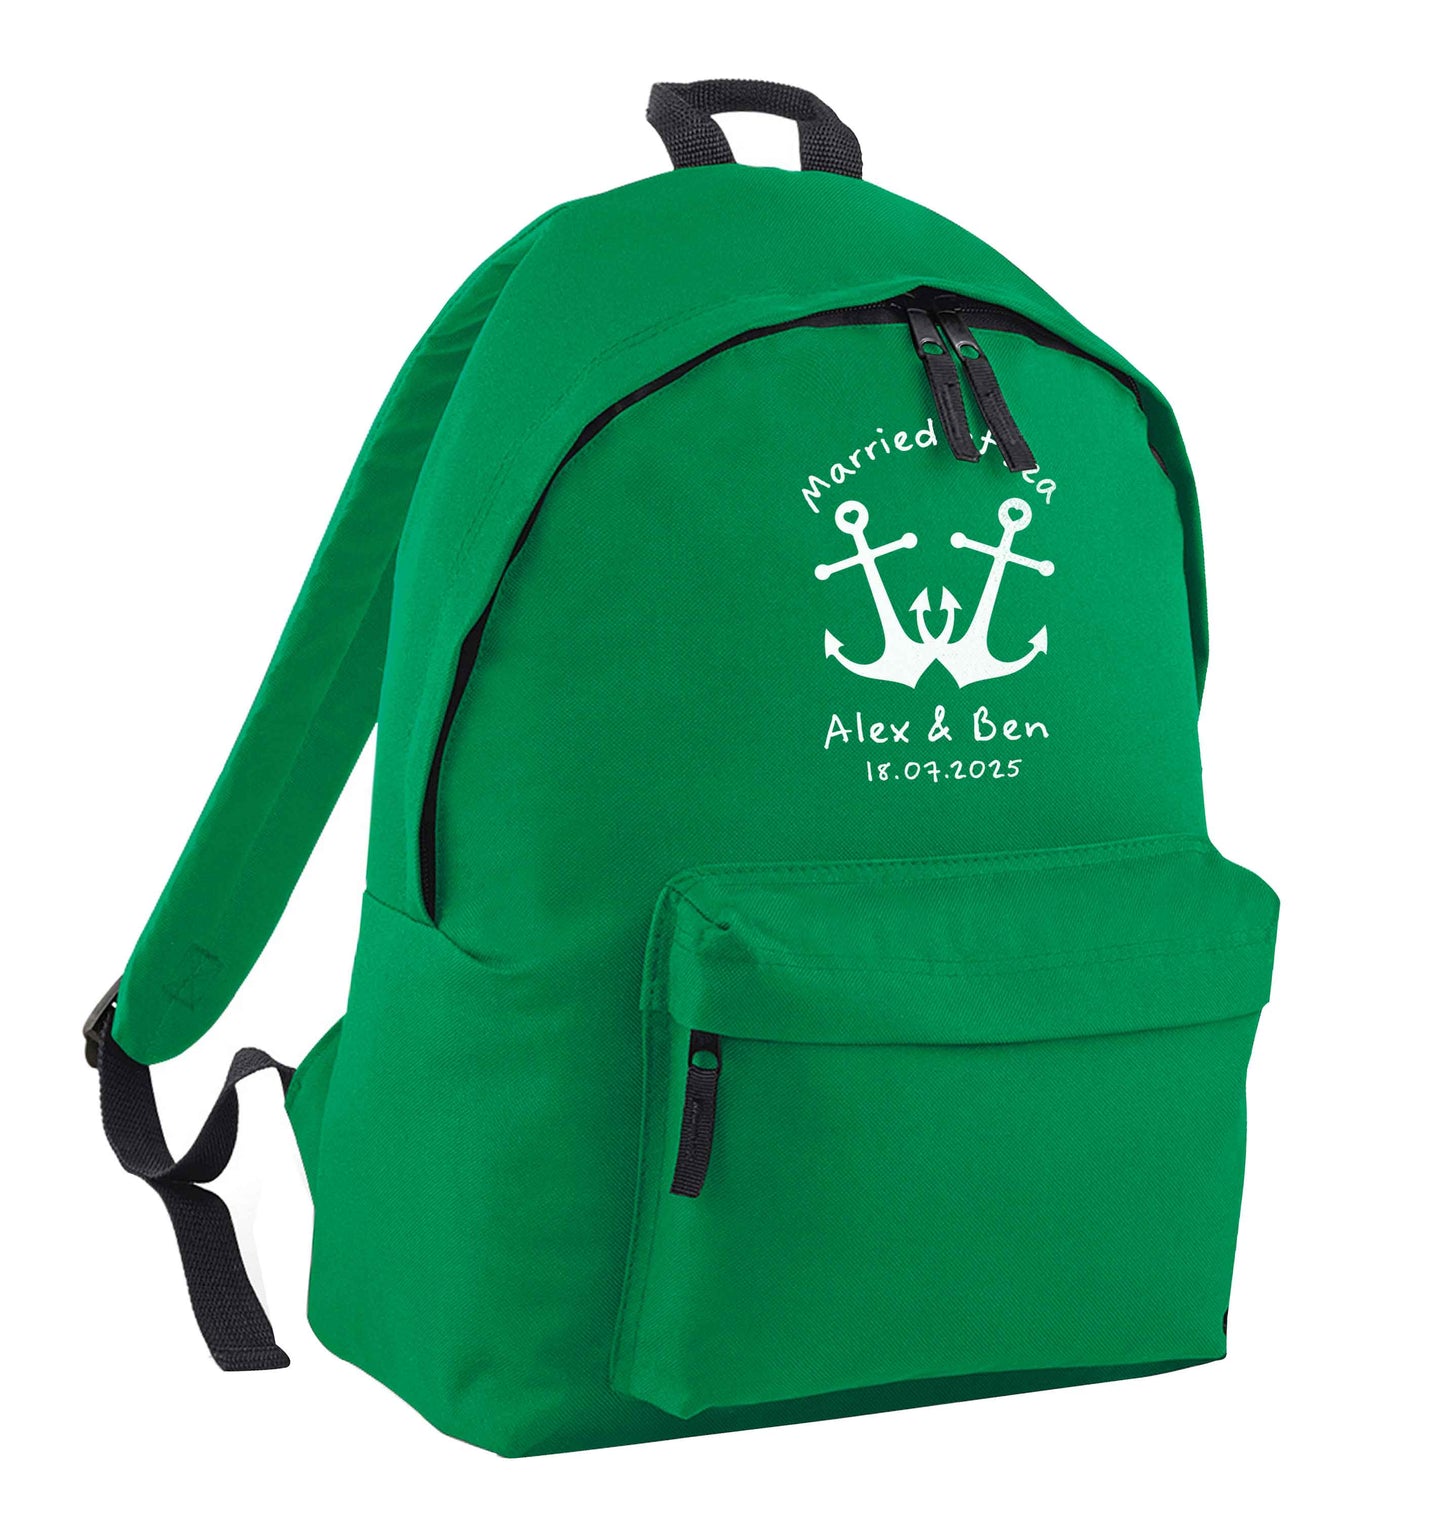 Married at sea blue anchors green adults backpack